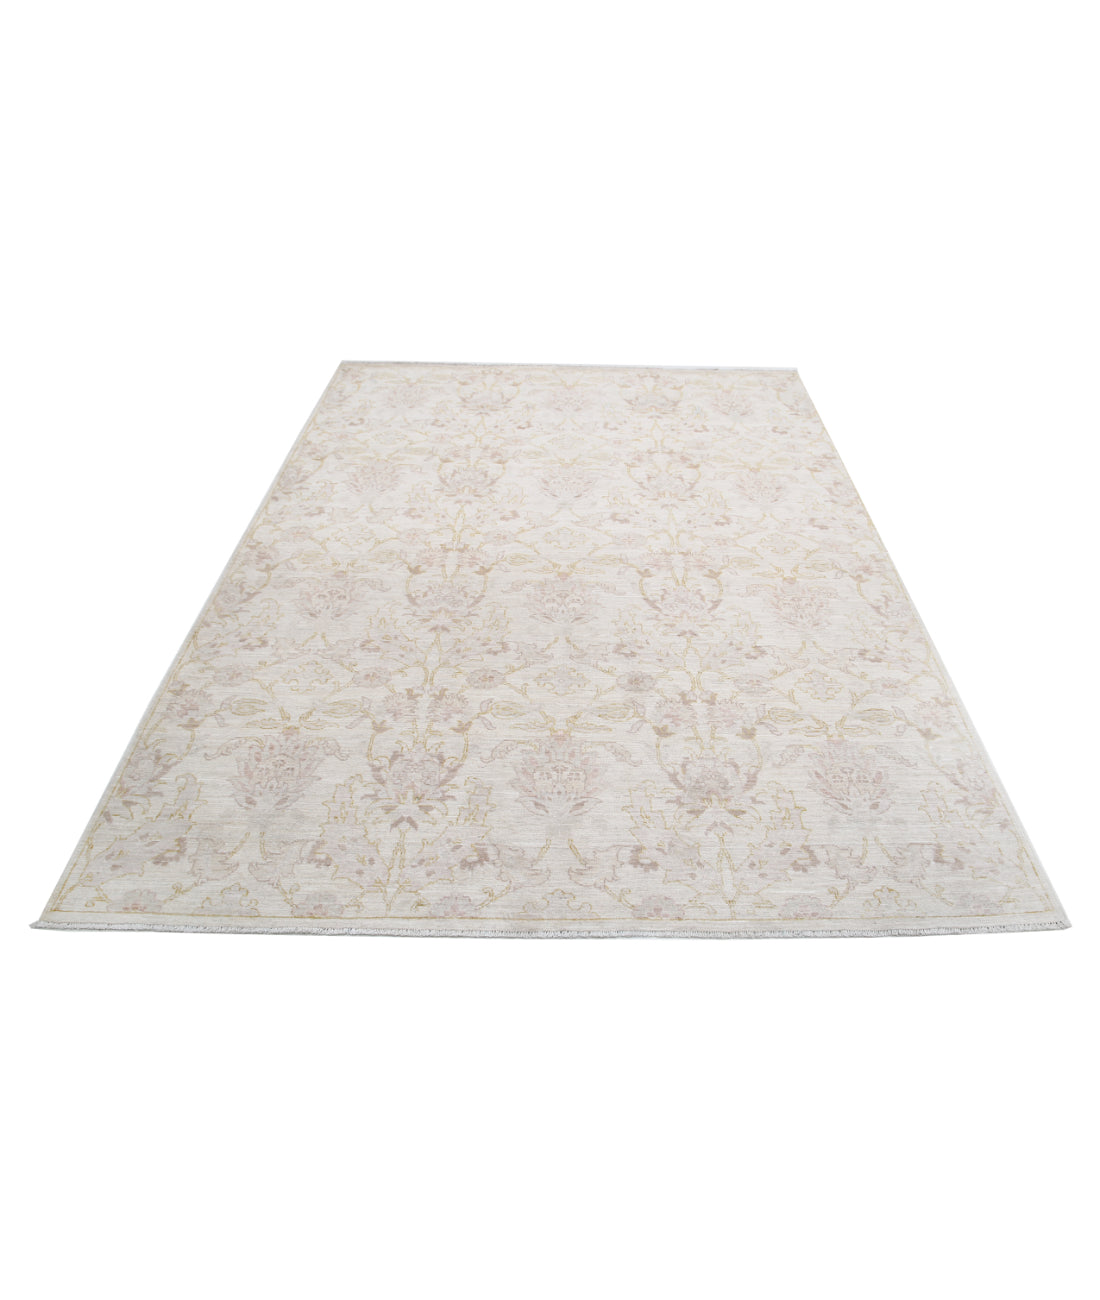 Hand Knotted Serenity Wool Rug - 6'1'' x 8'4'' 6'1'' x 8'4'' (183 X 250) / Ivory / Gold